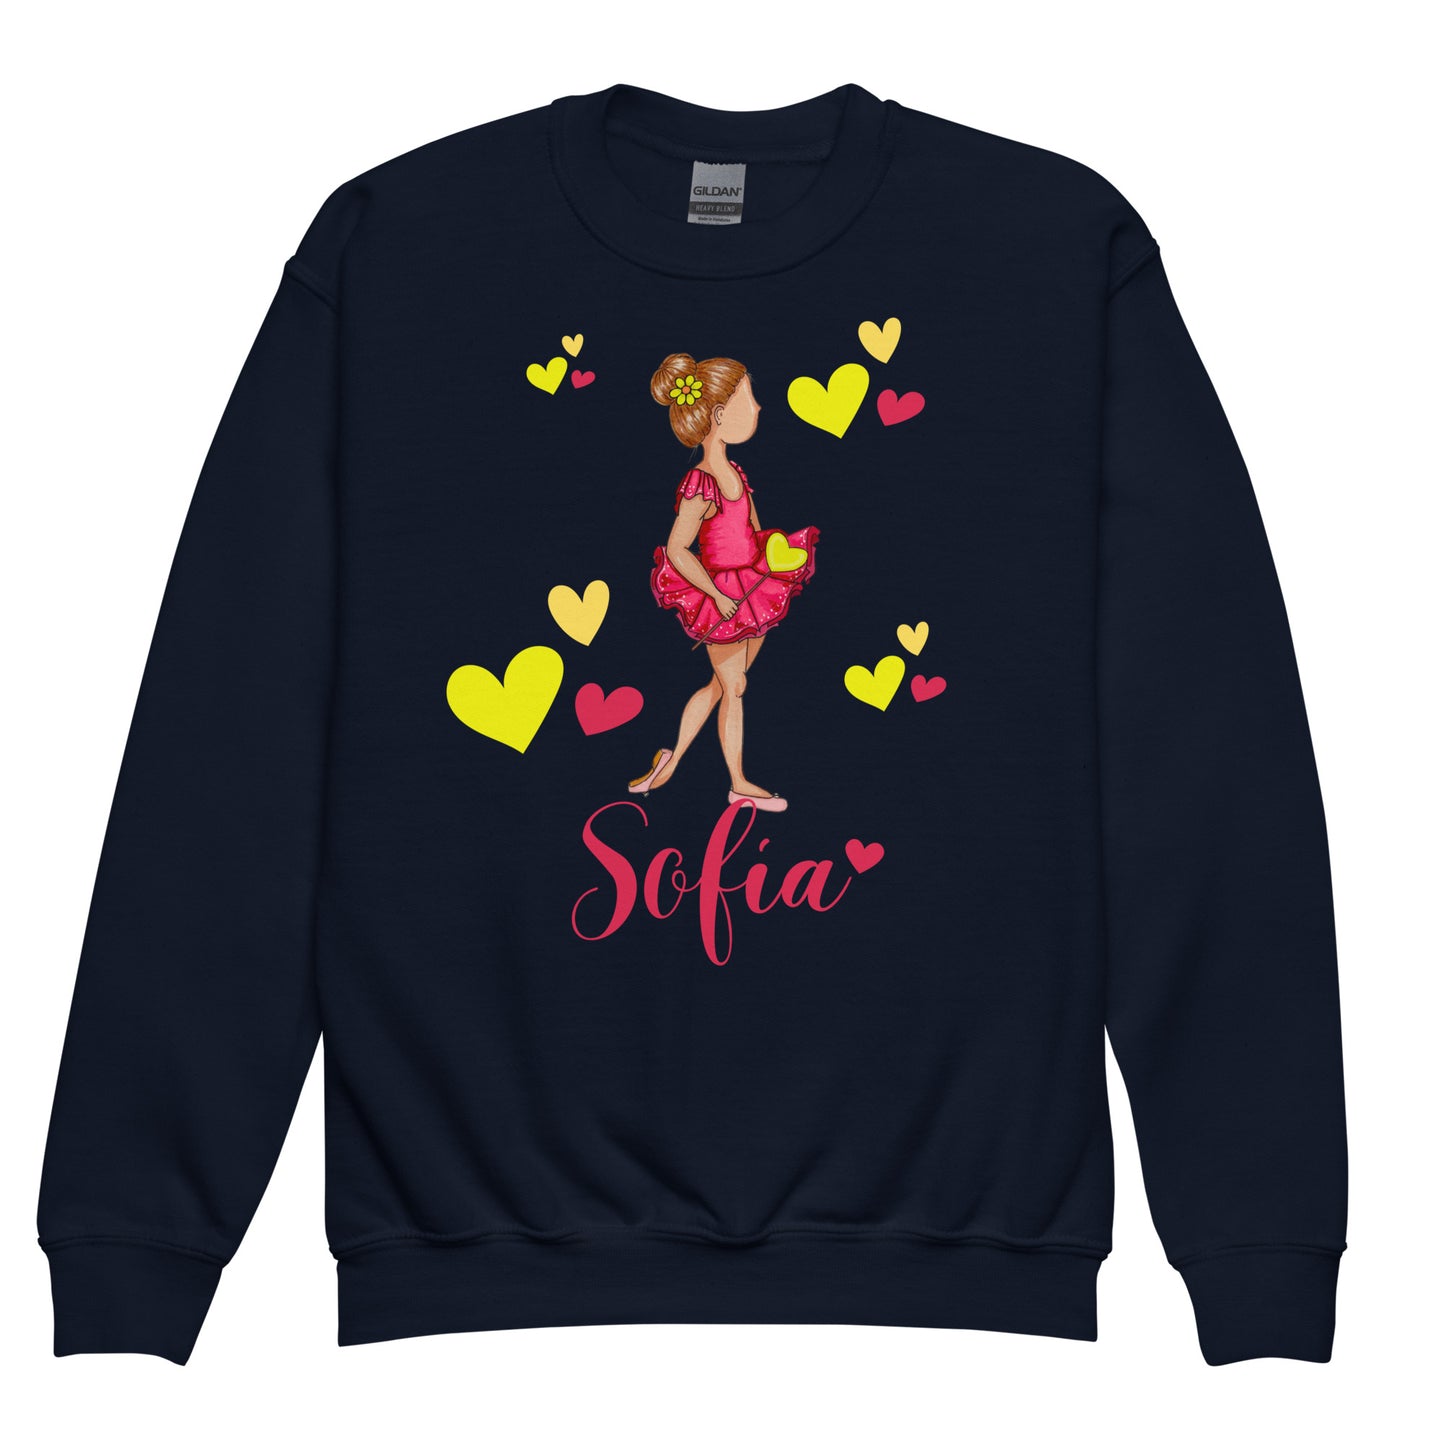 a sweatshirt with a girl in a pink dress and hearts